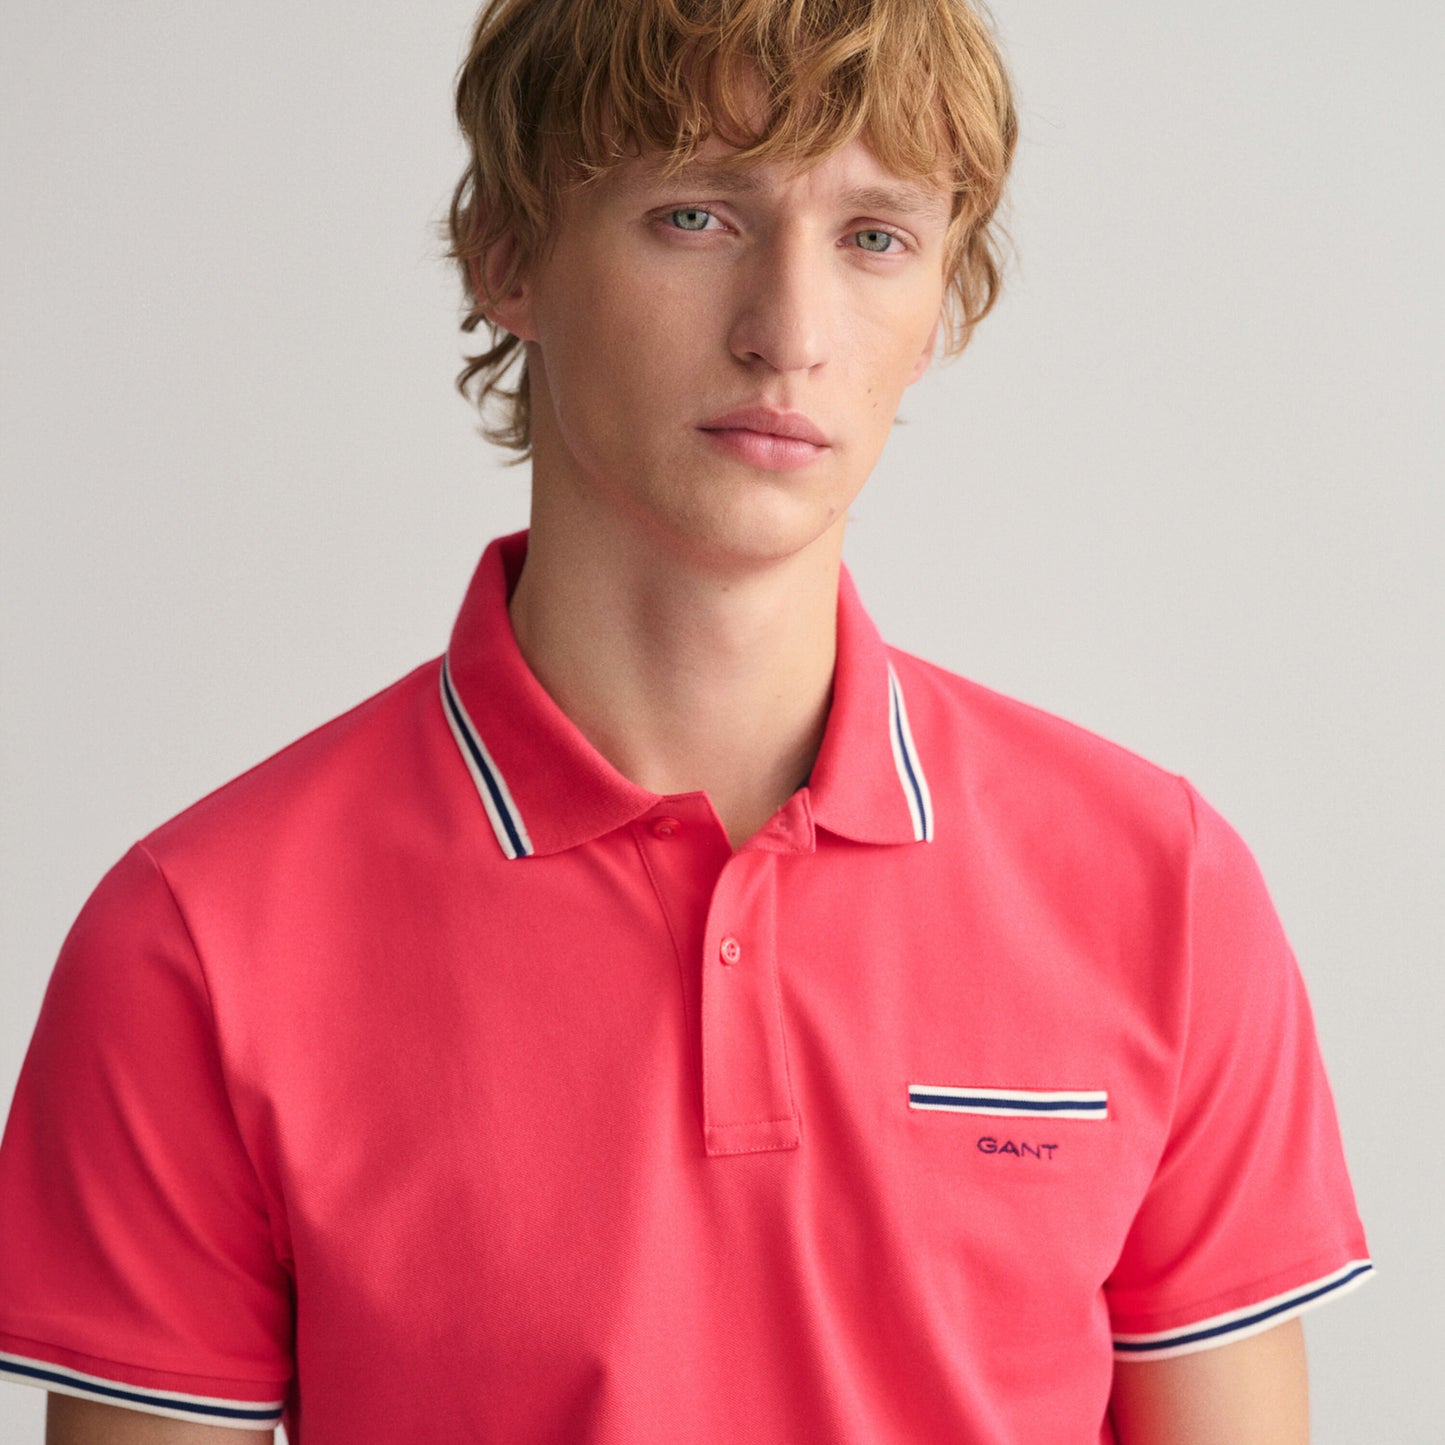 Gant 2003170 635 Magenta Pink 3-Col Tipping Solid Pique Polo Shirt